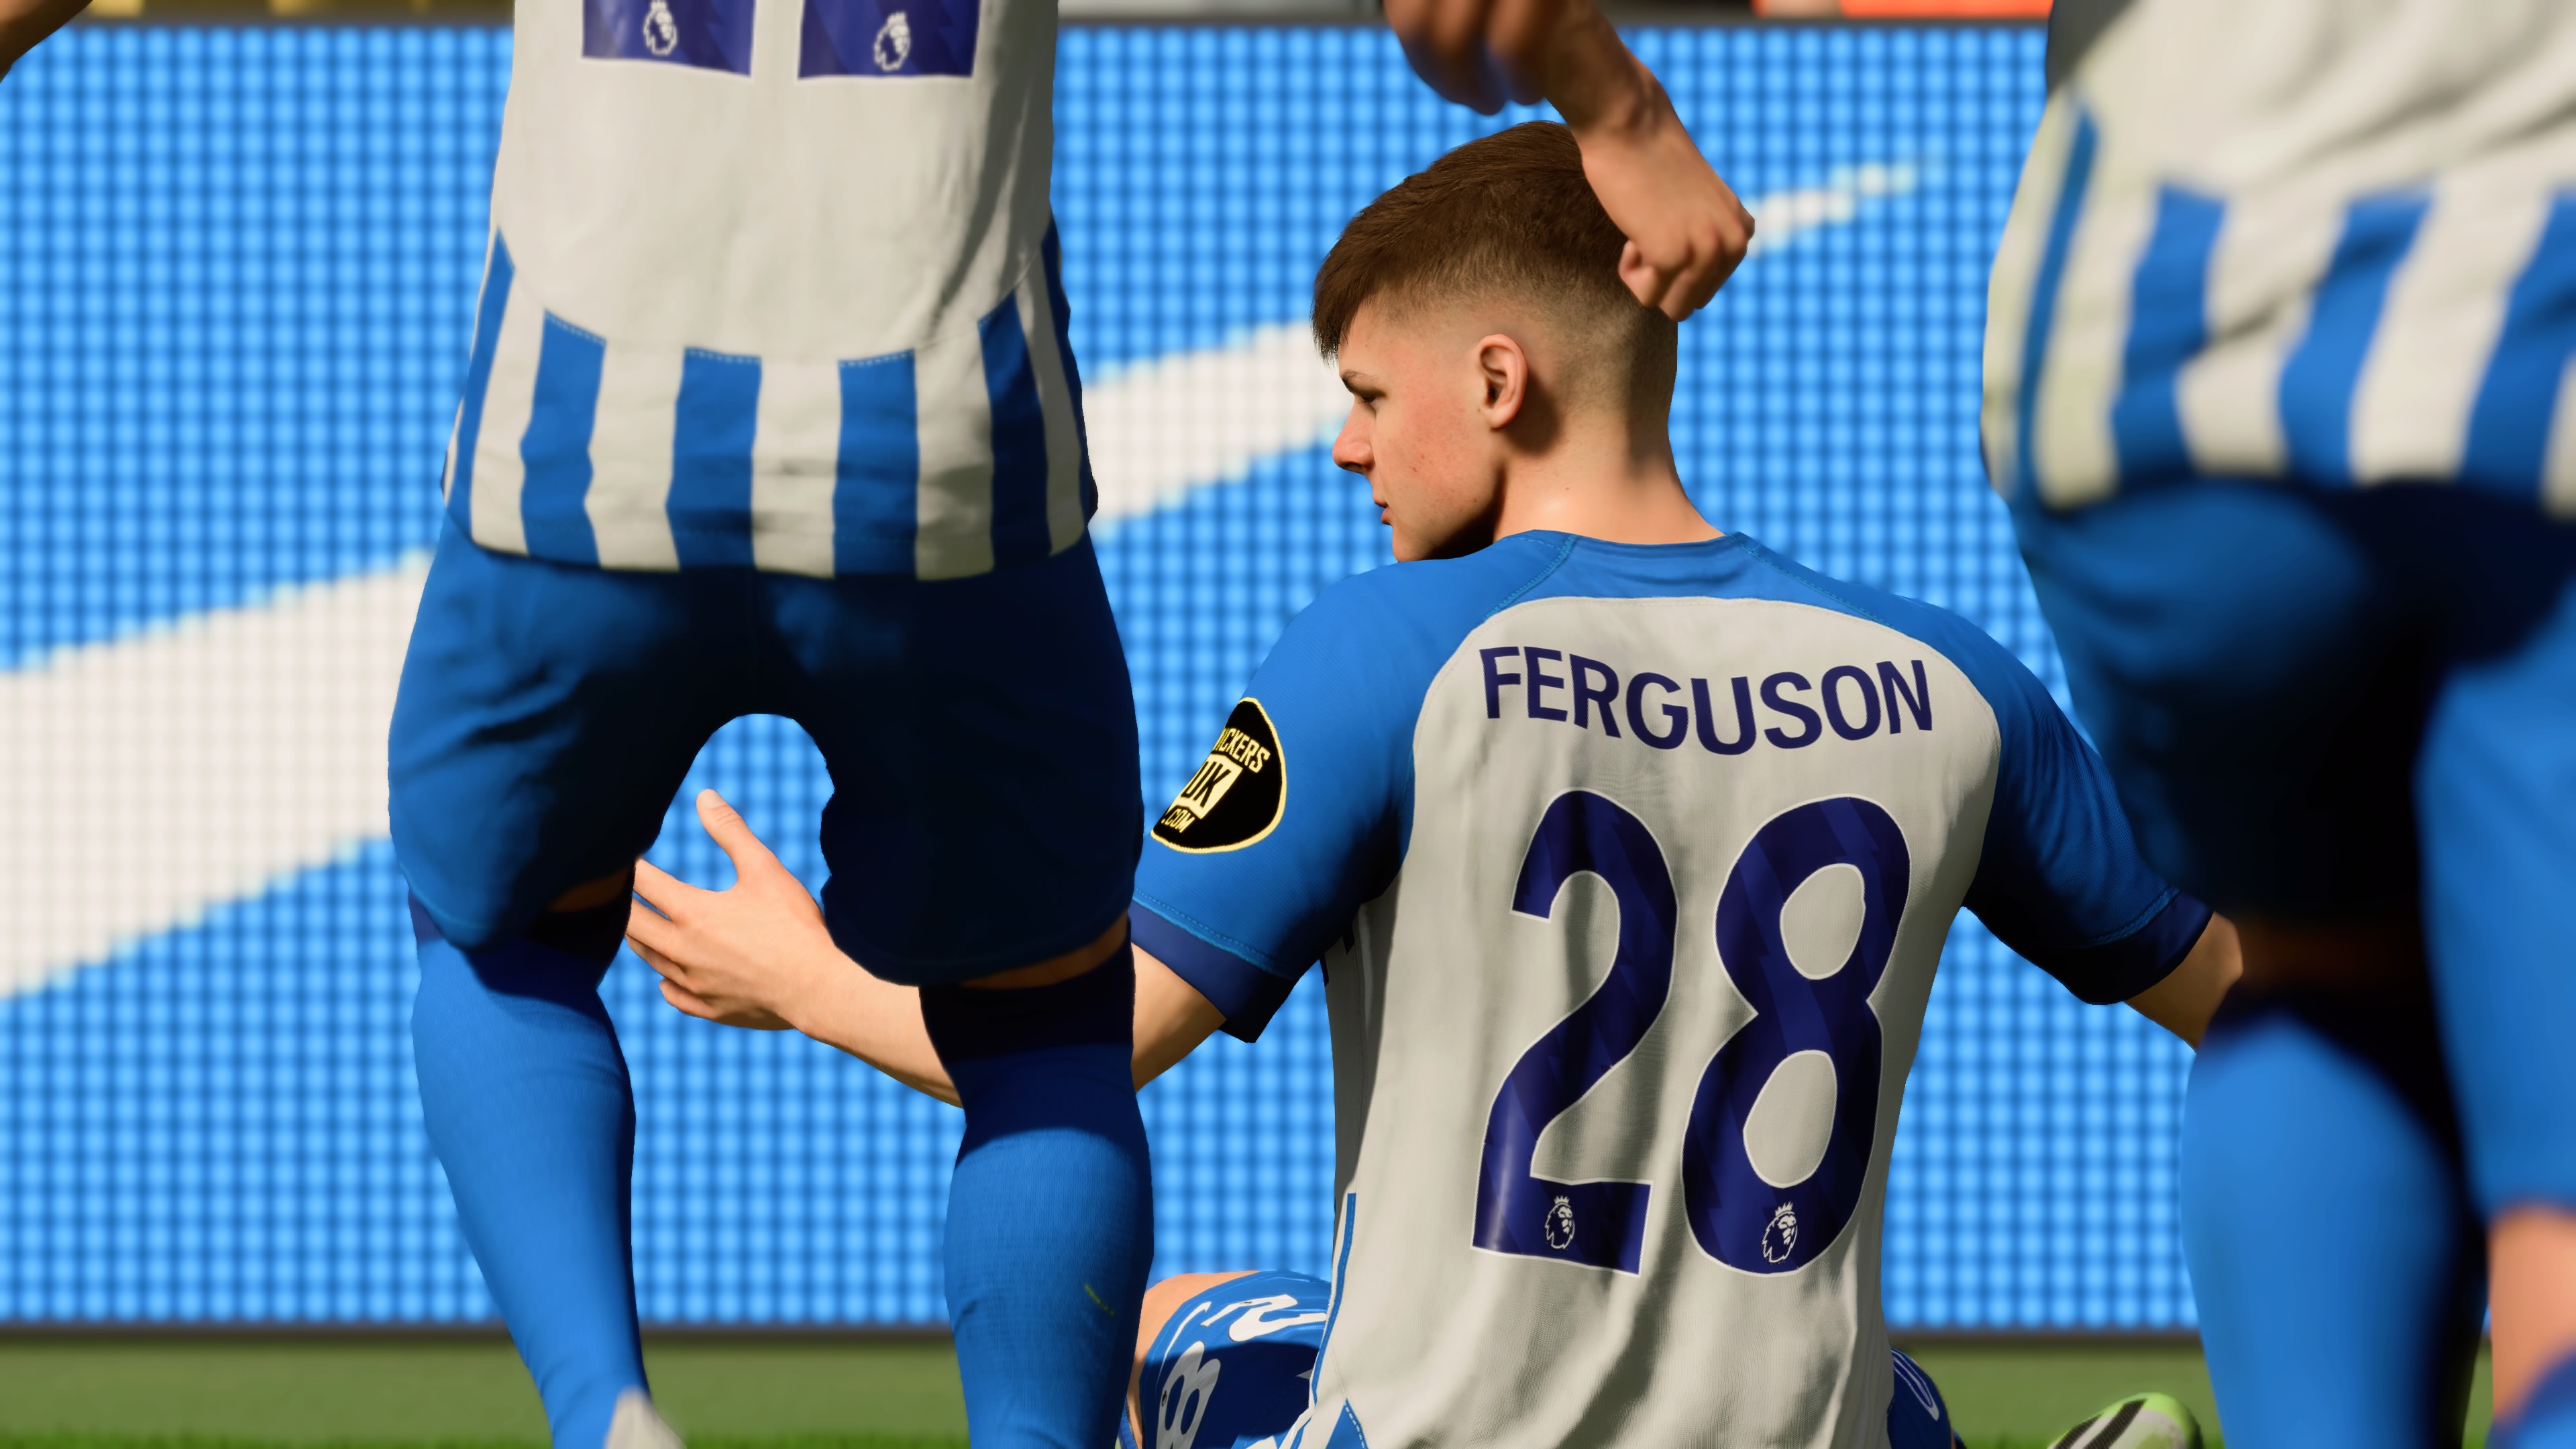 EA FC 24 review: More realistic than any other FIFA game - Charlie